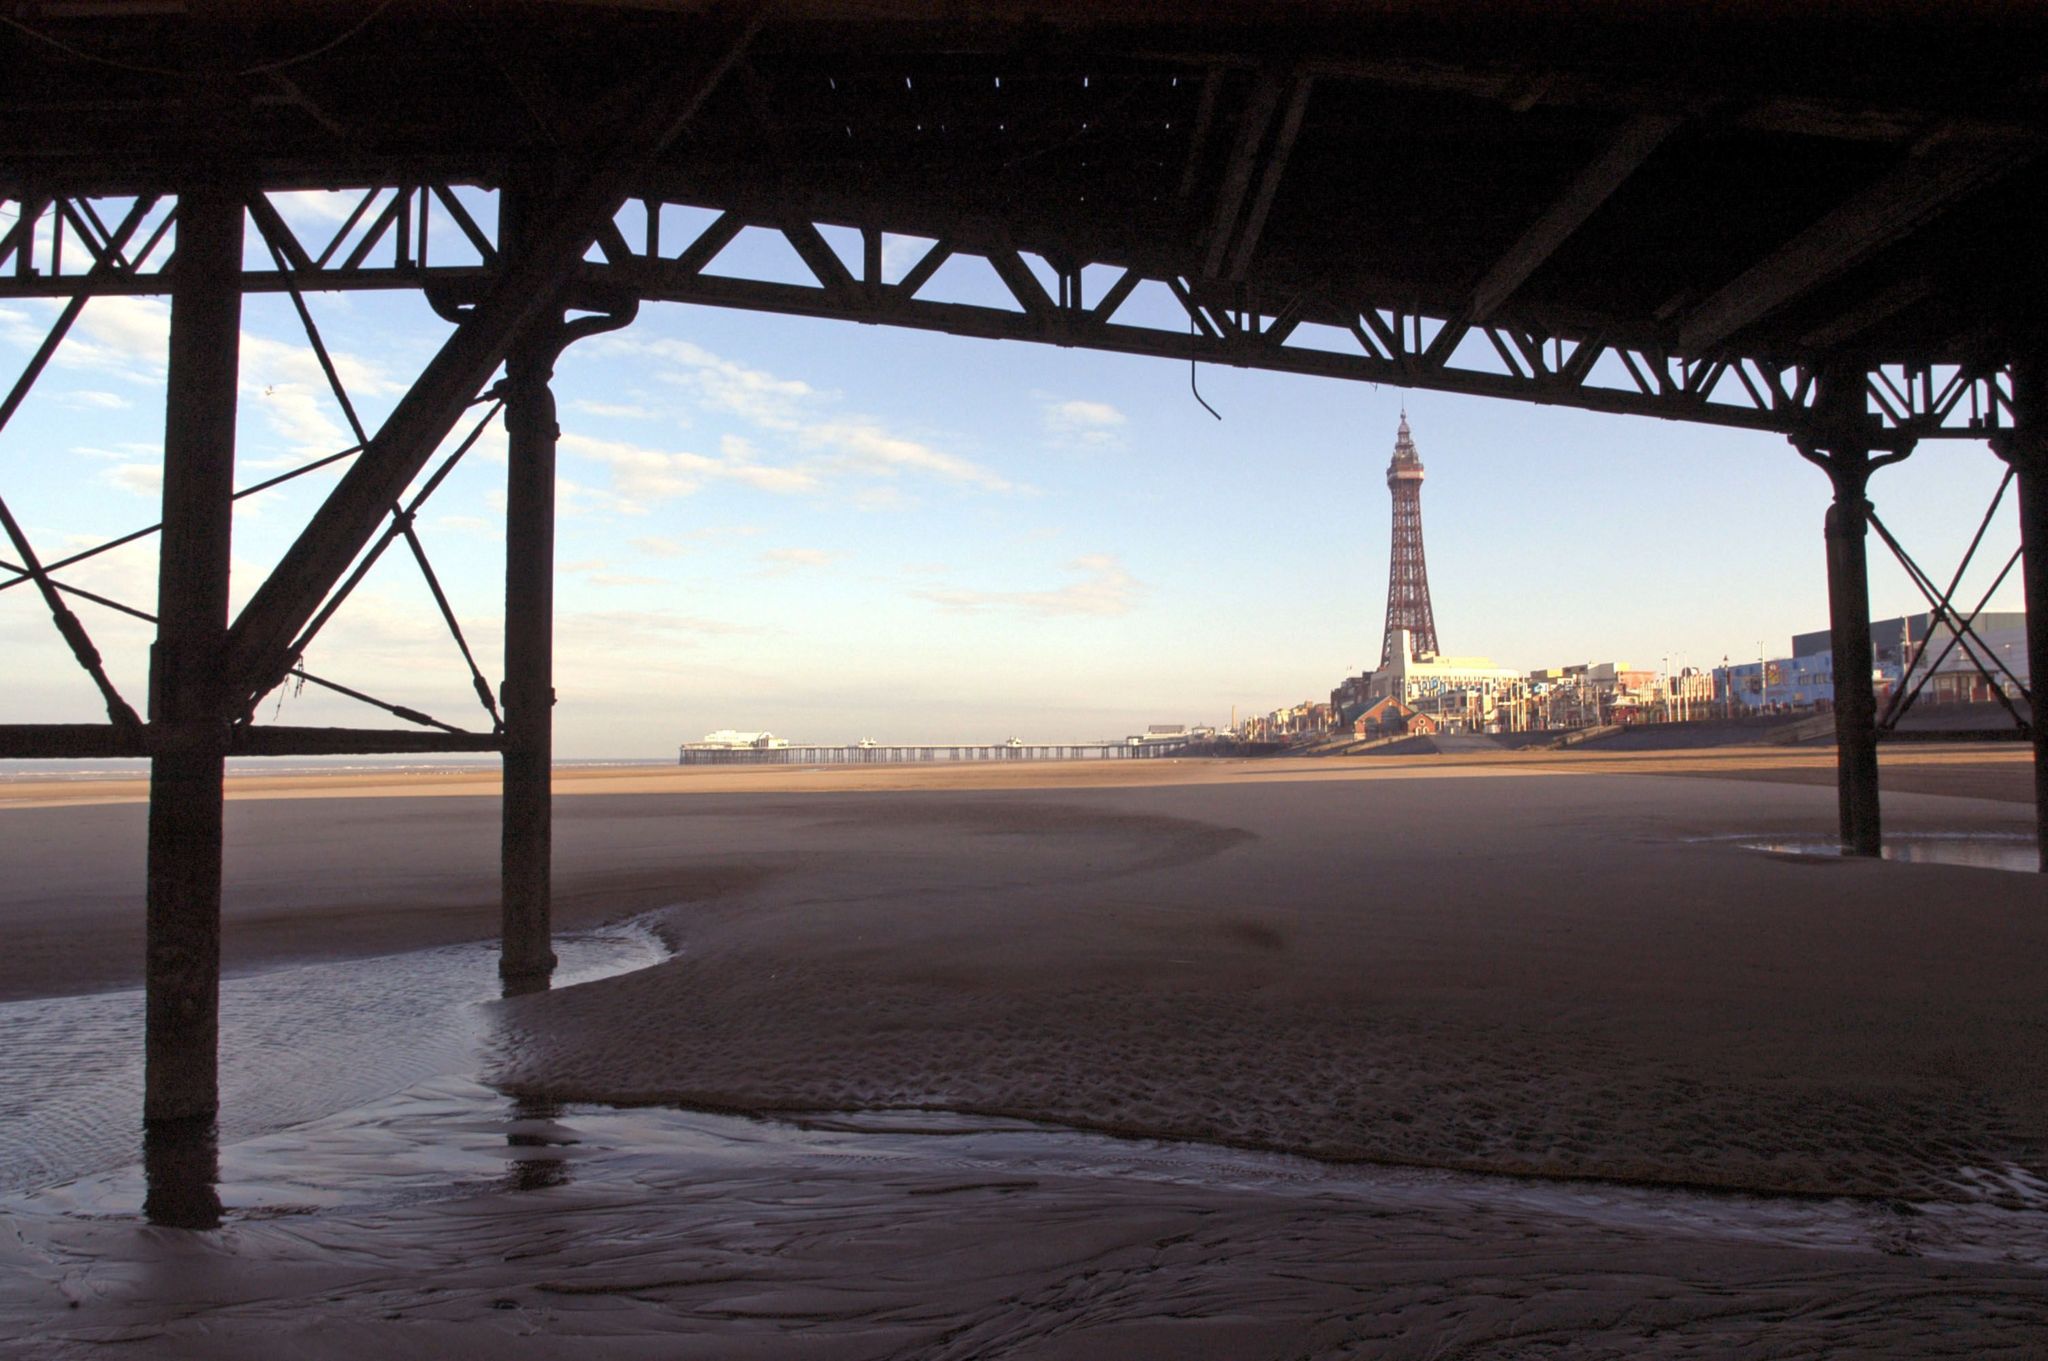 Blackpool Tower is seen from under the Central Pier at low tide on the beach at Blackpool